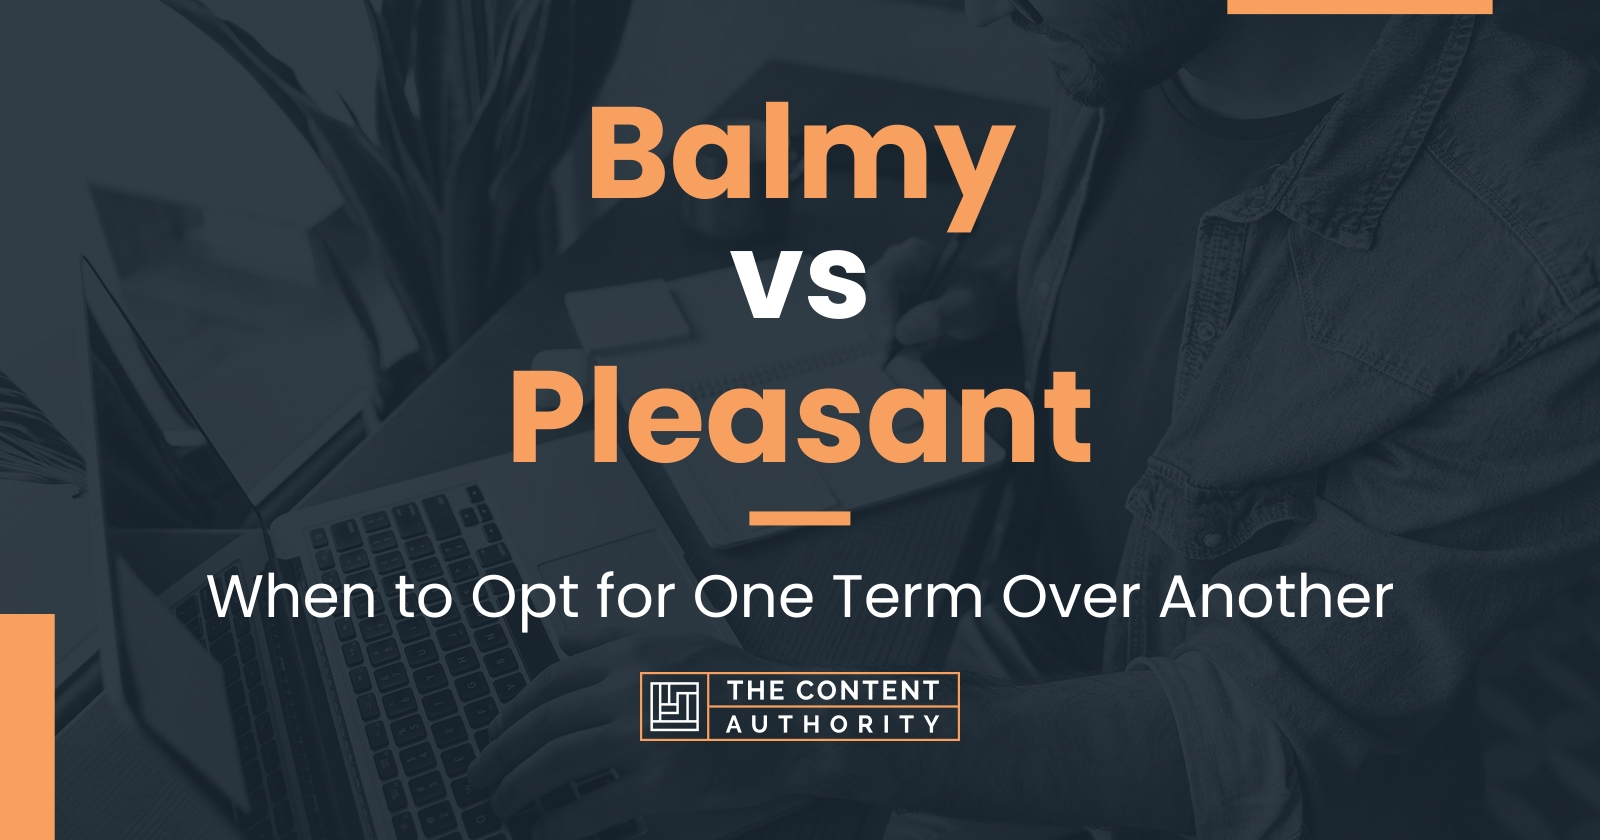 Balmy vs Pleasant: When to Opt for One Term Over Another